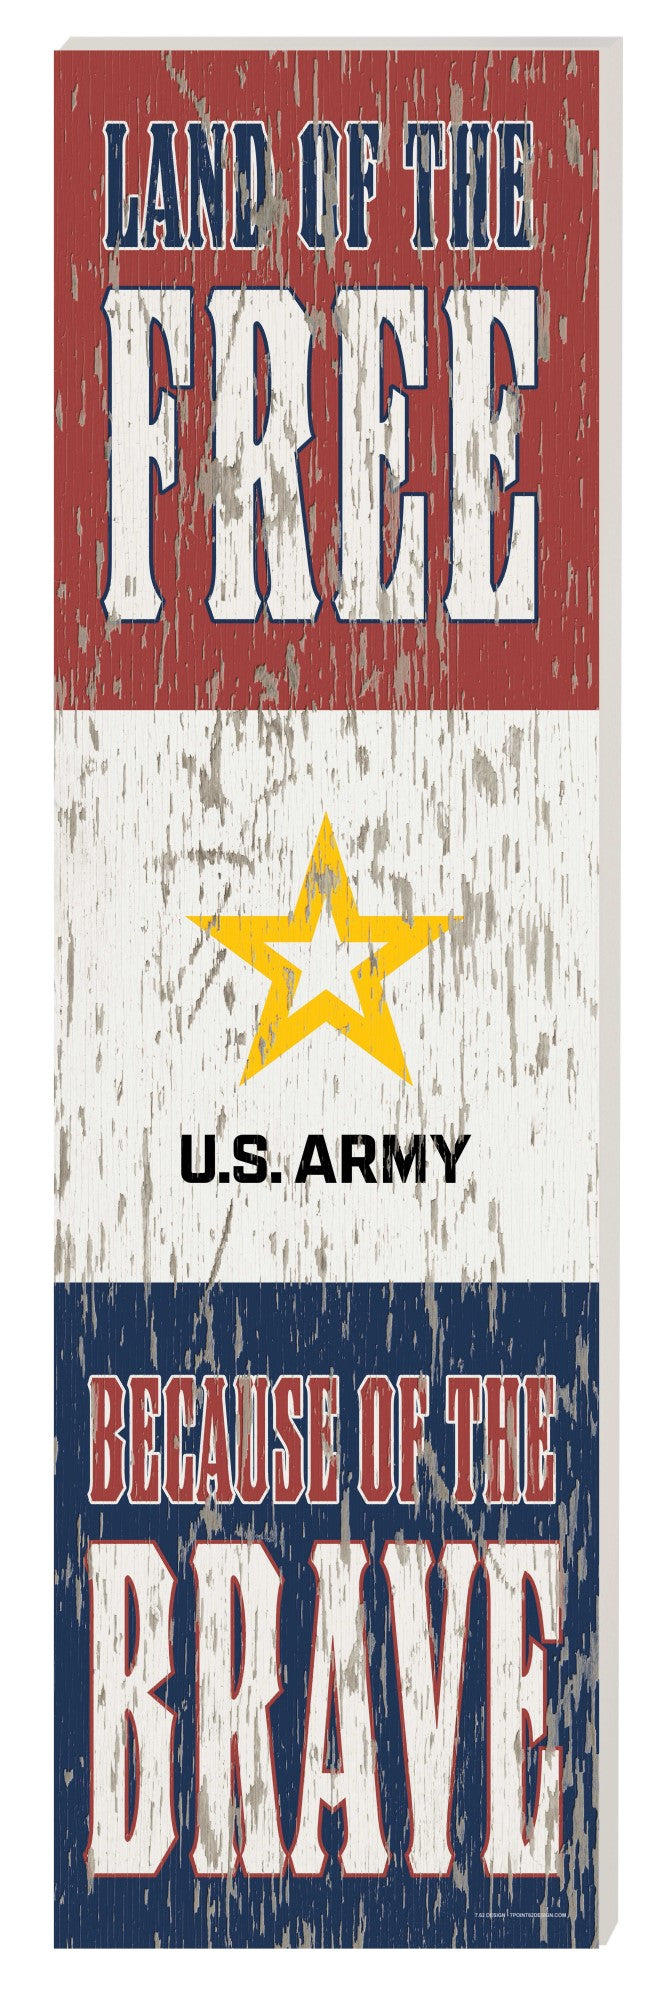 United States Army Land of the Free Indoor Outdoor (10x35)